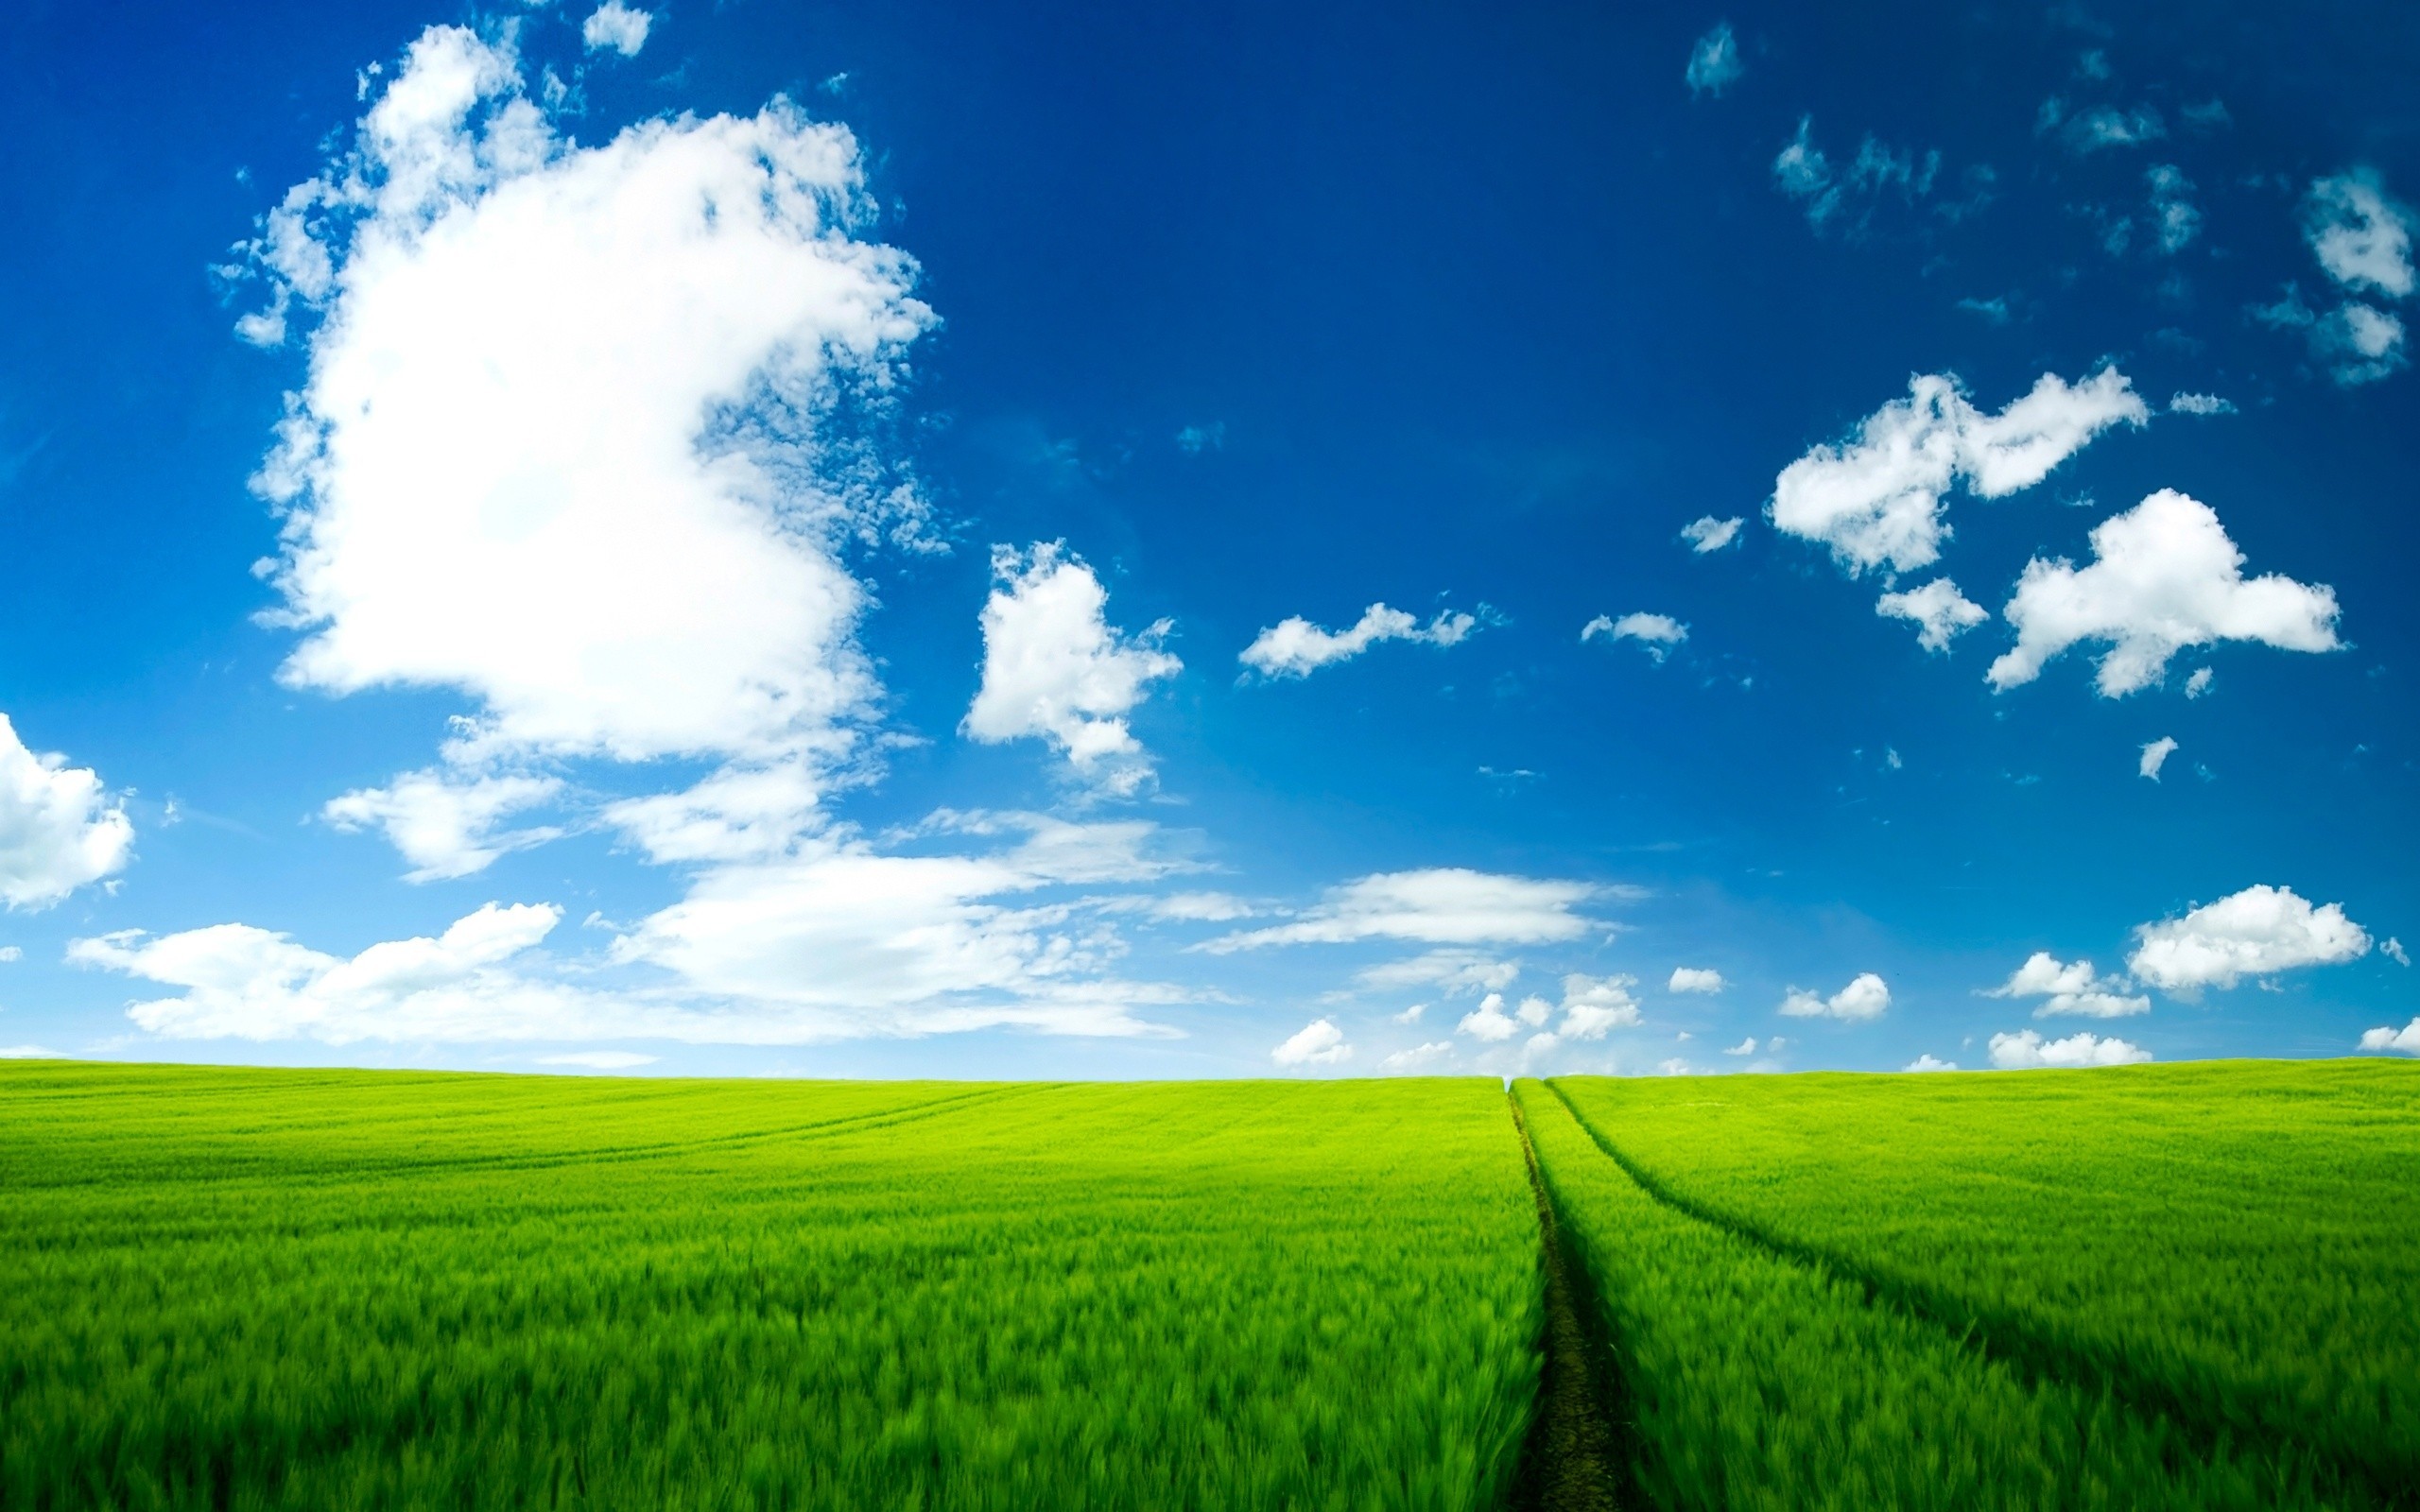 most beautiful wallpapers in the world free download,sky,natural landscape,people in nature,field,green